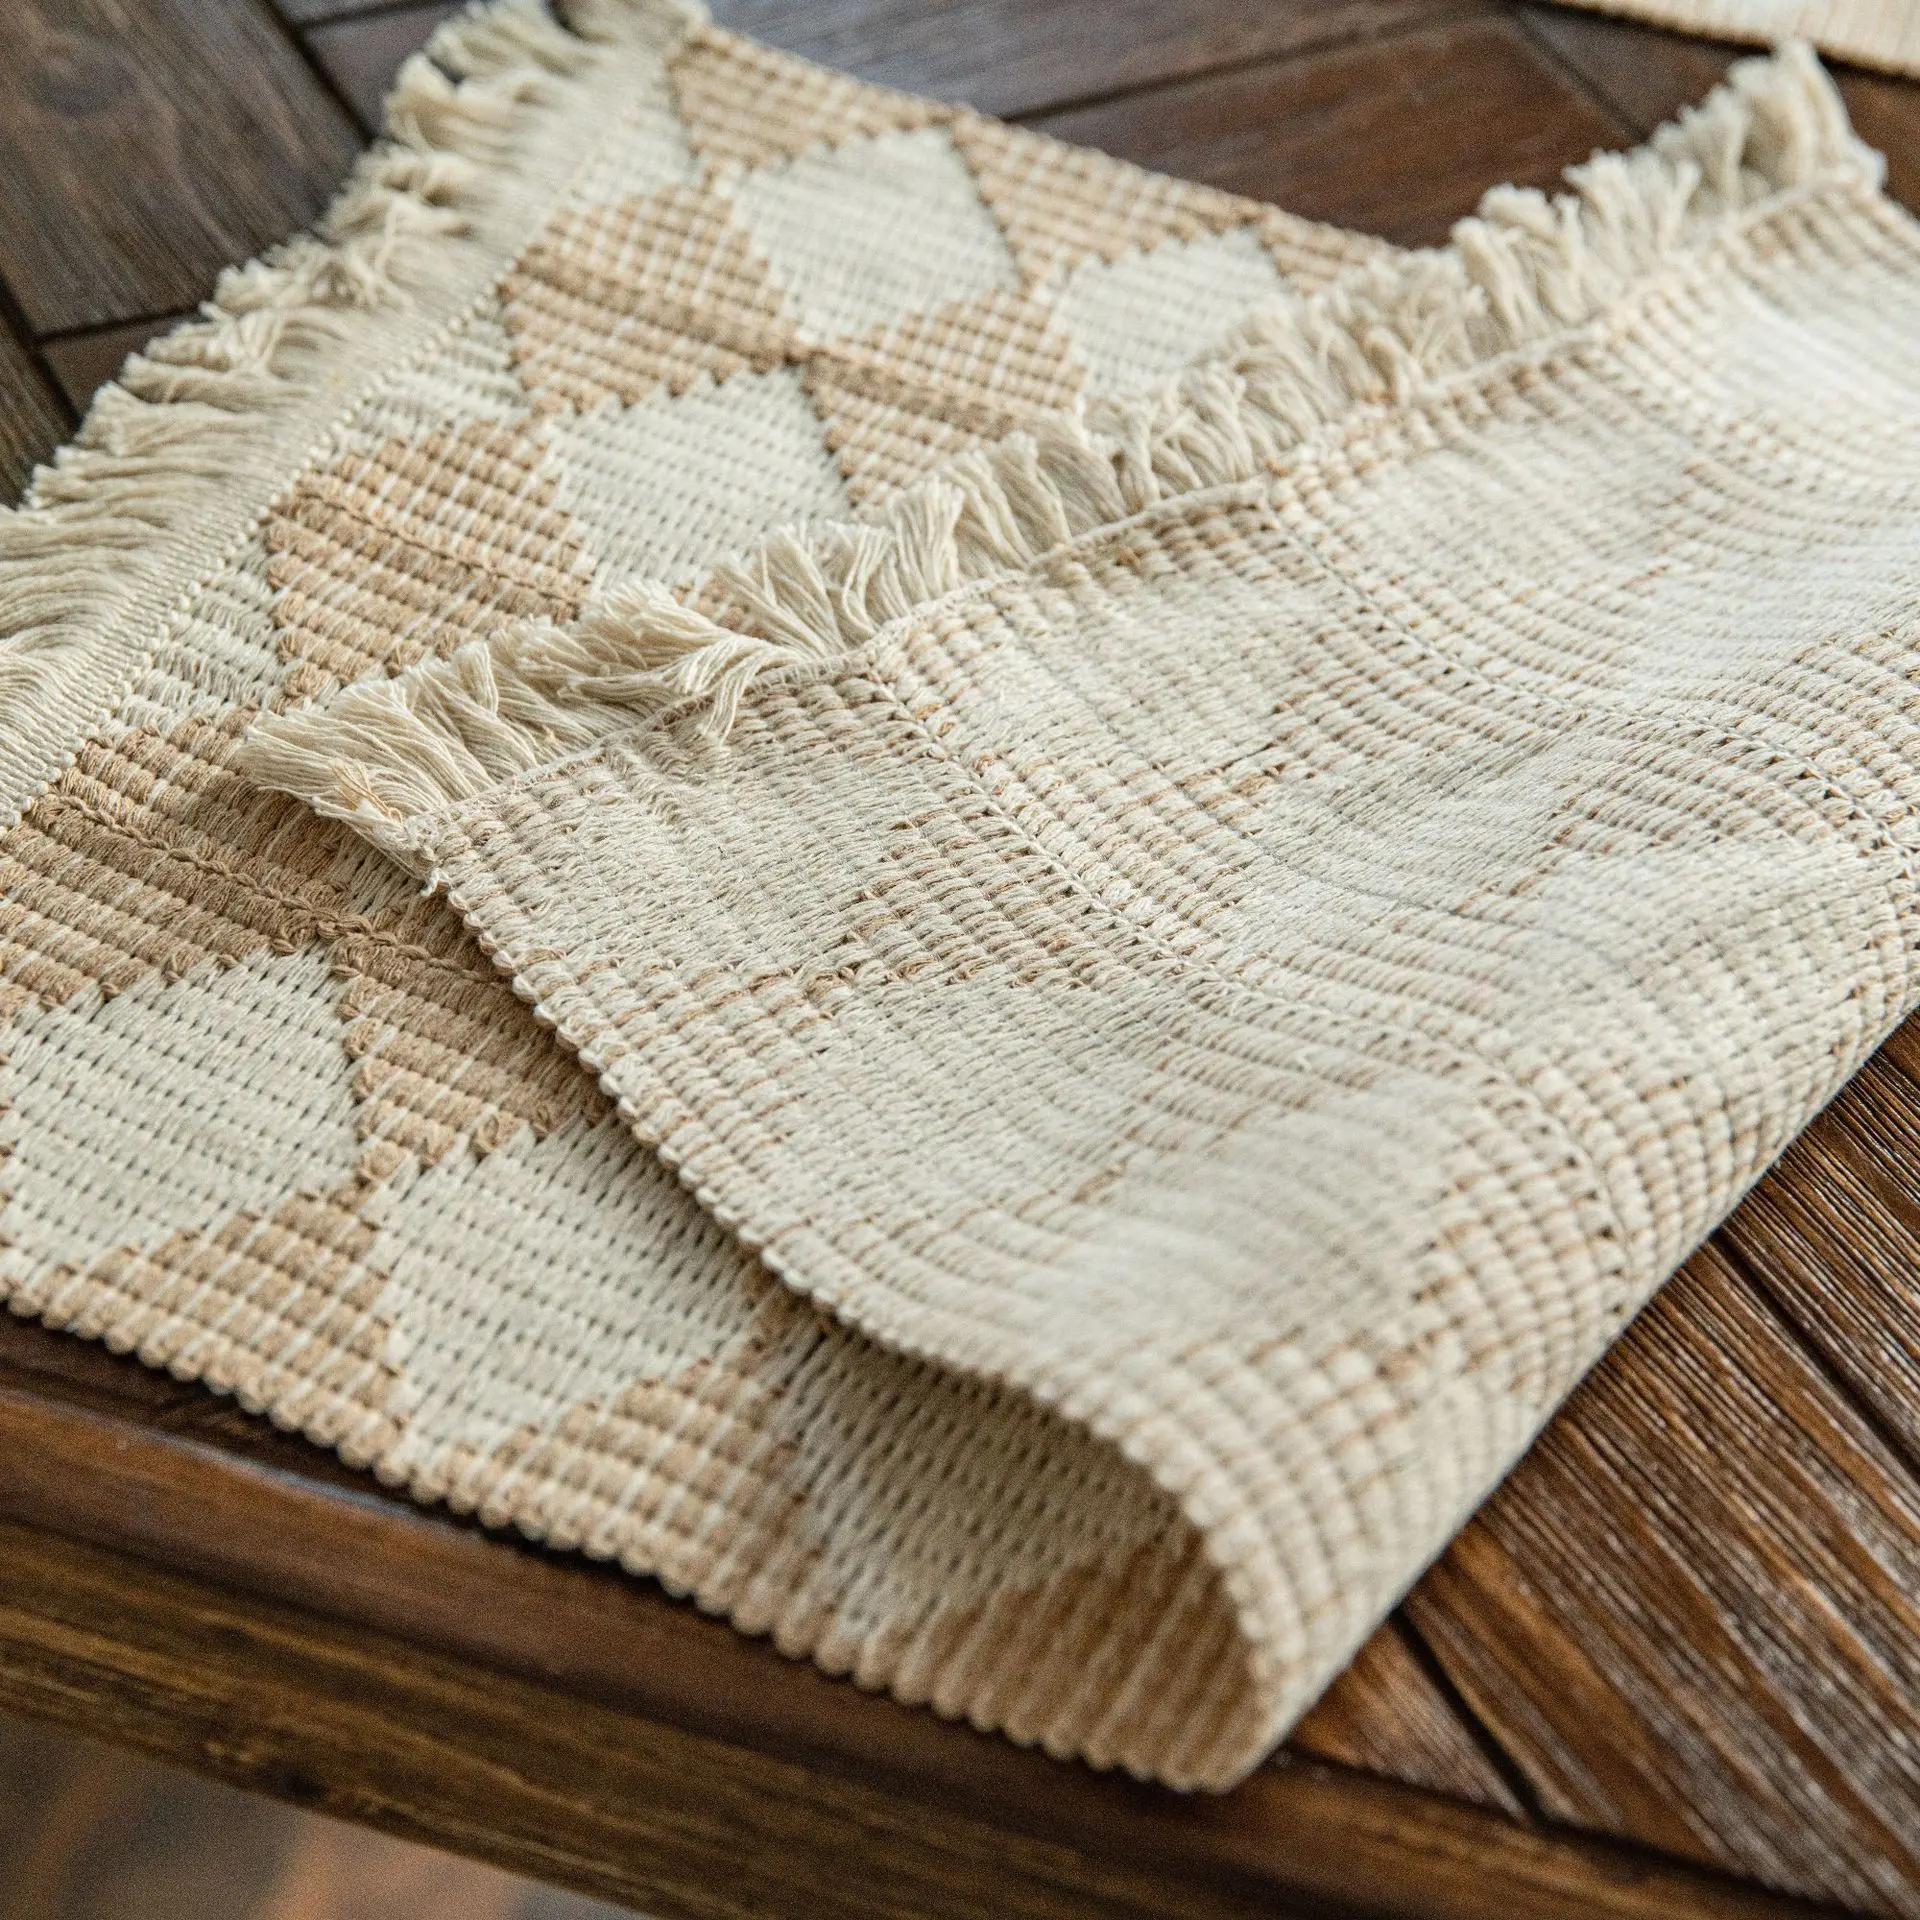 

35x50cm Macrame Table Flag Placemats - Handmade Cotton Woven Boho Modern Farmhouse Fringe Dining Kitchen Rustic Natural Placemat